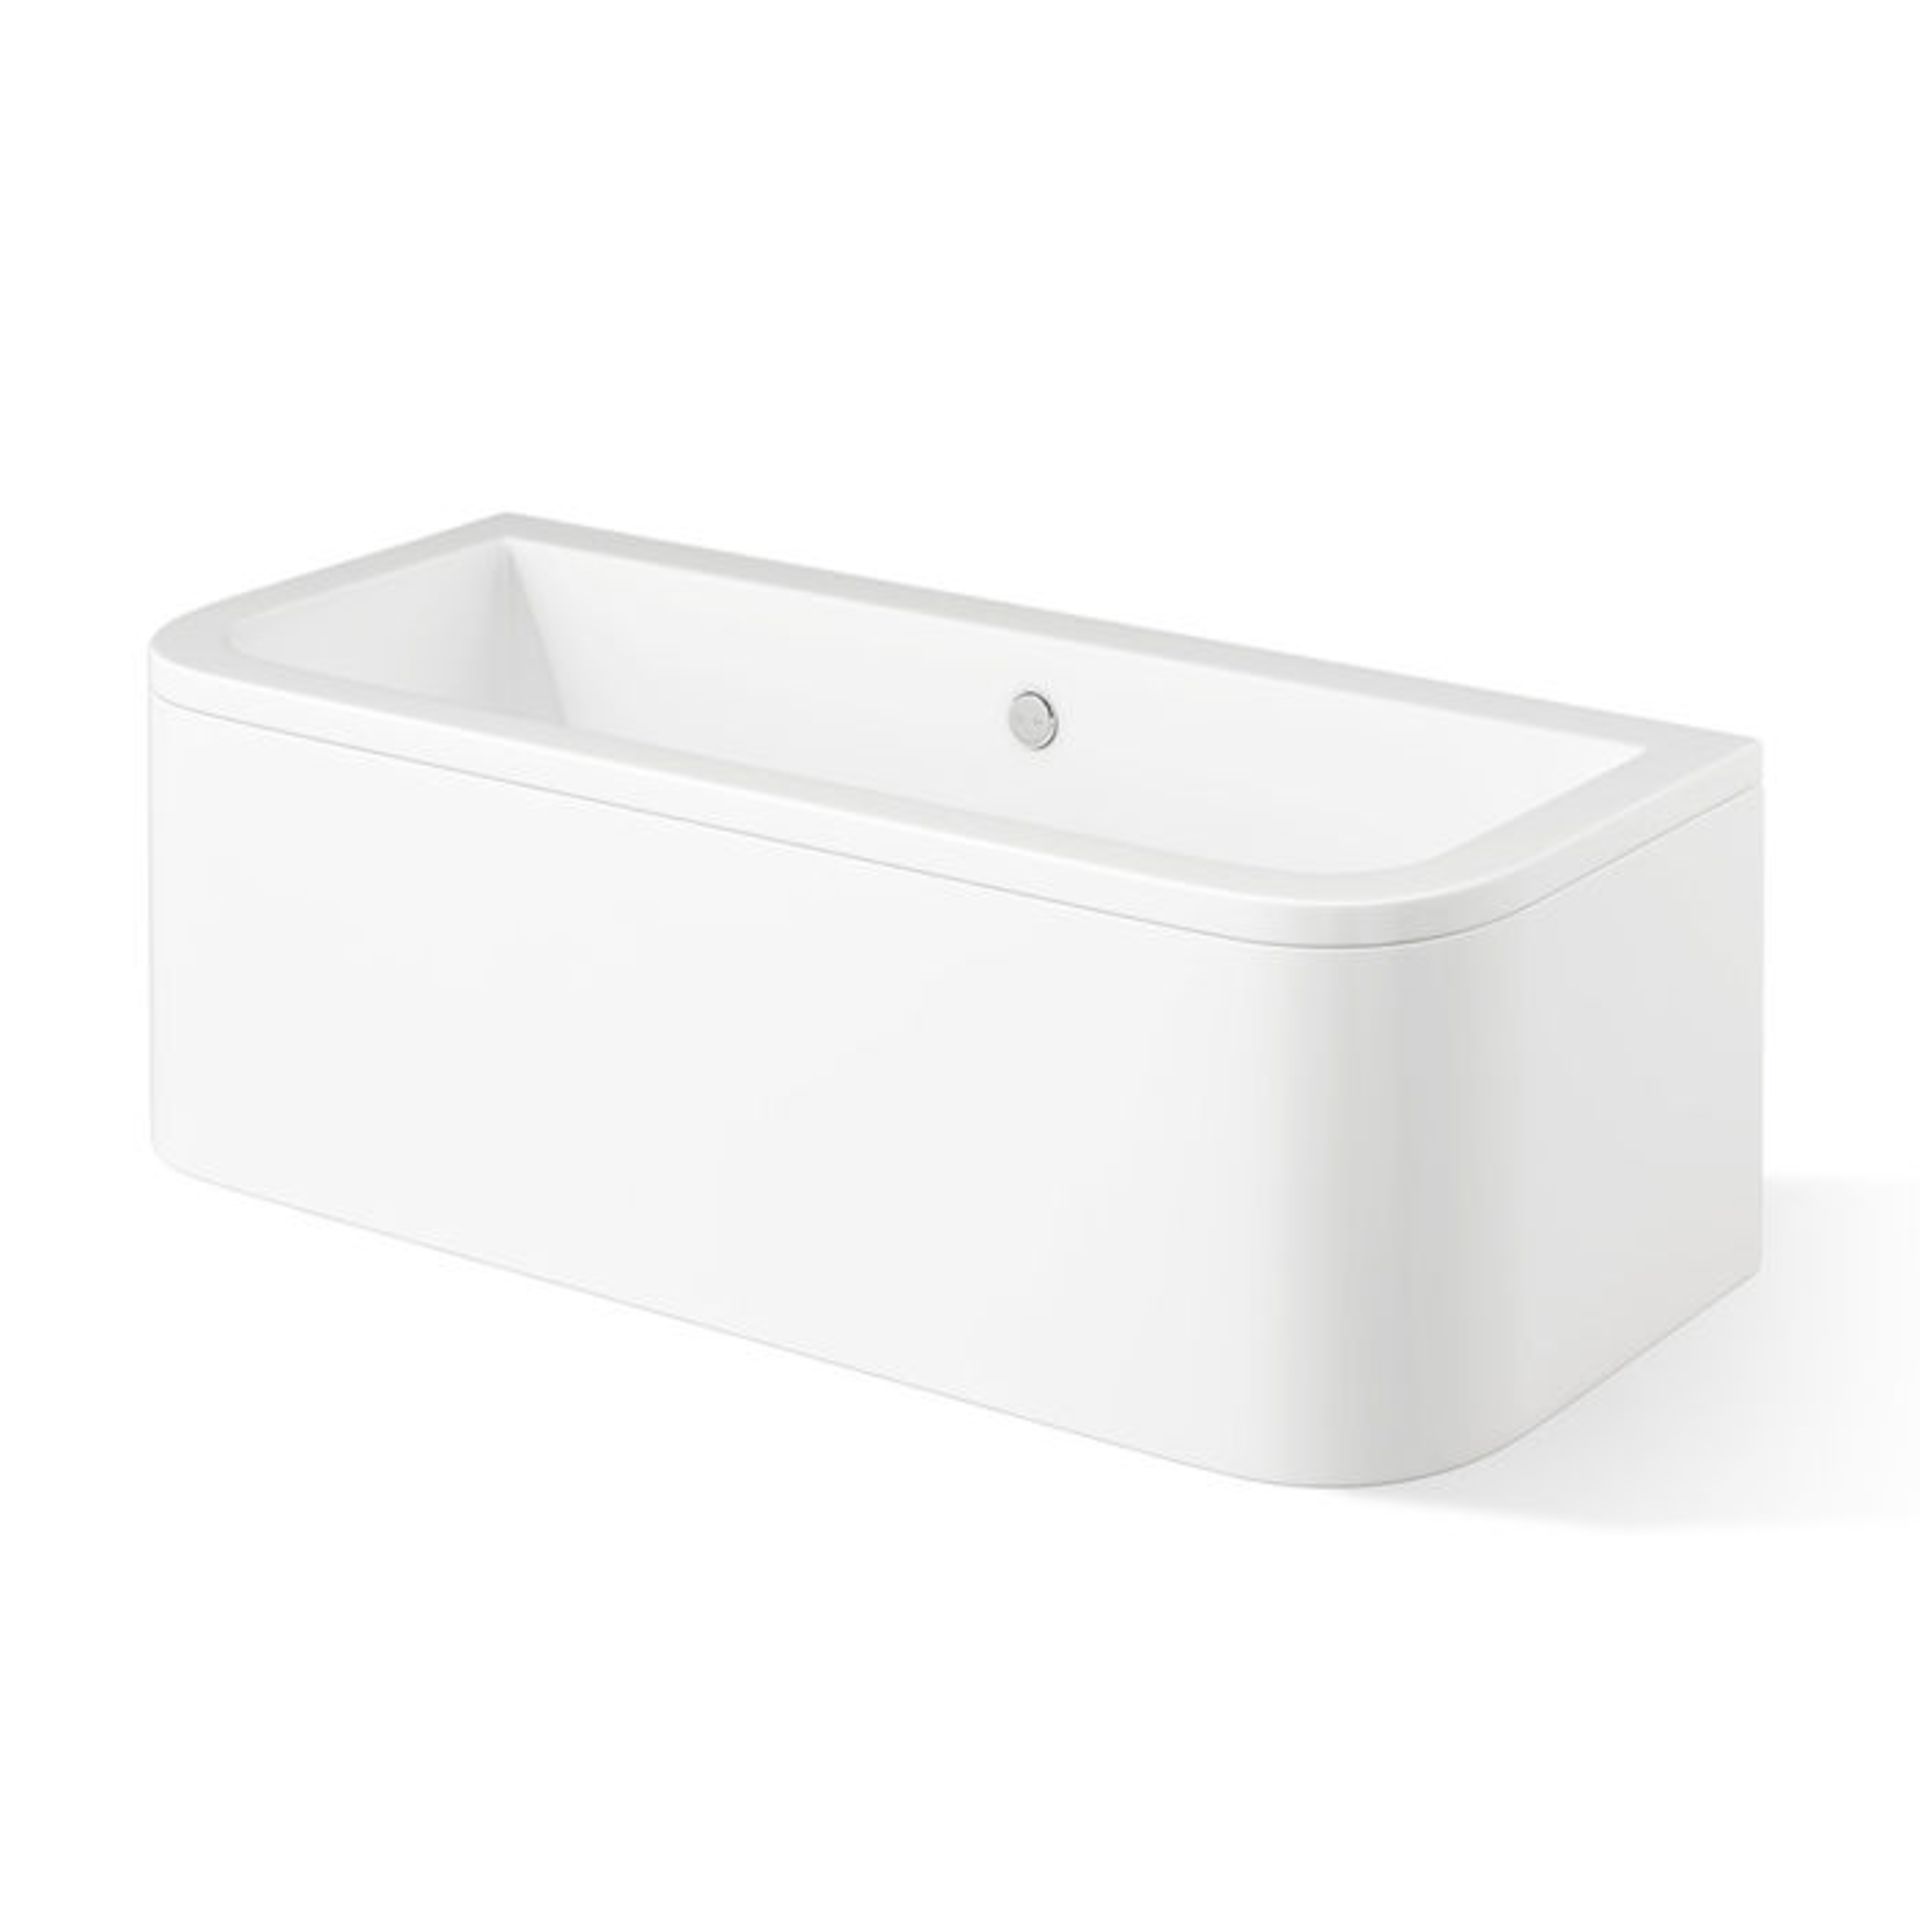 (PT79) 1700x750x460mm Denver Back to Wall Bath - Large. The double ended feature makes this bath - Image 3 of 4